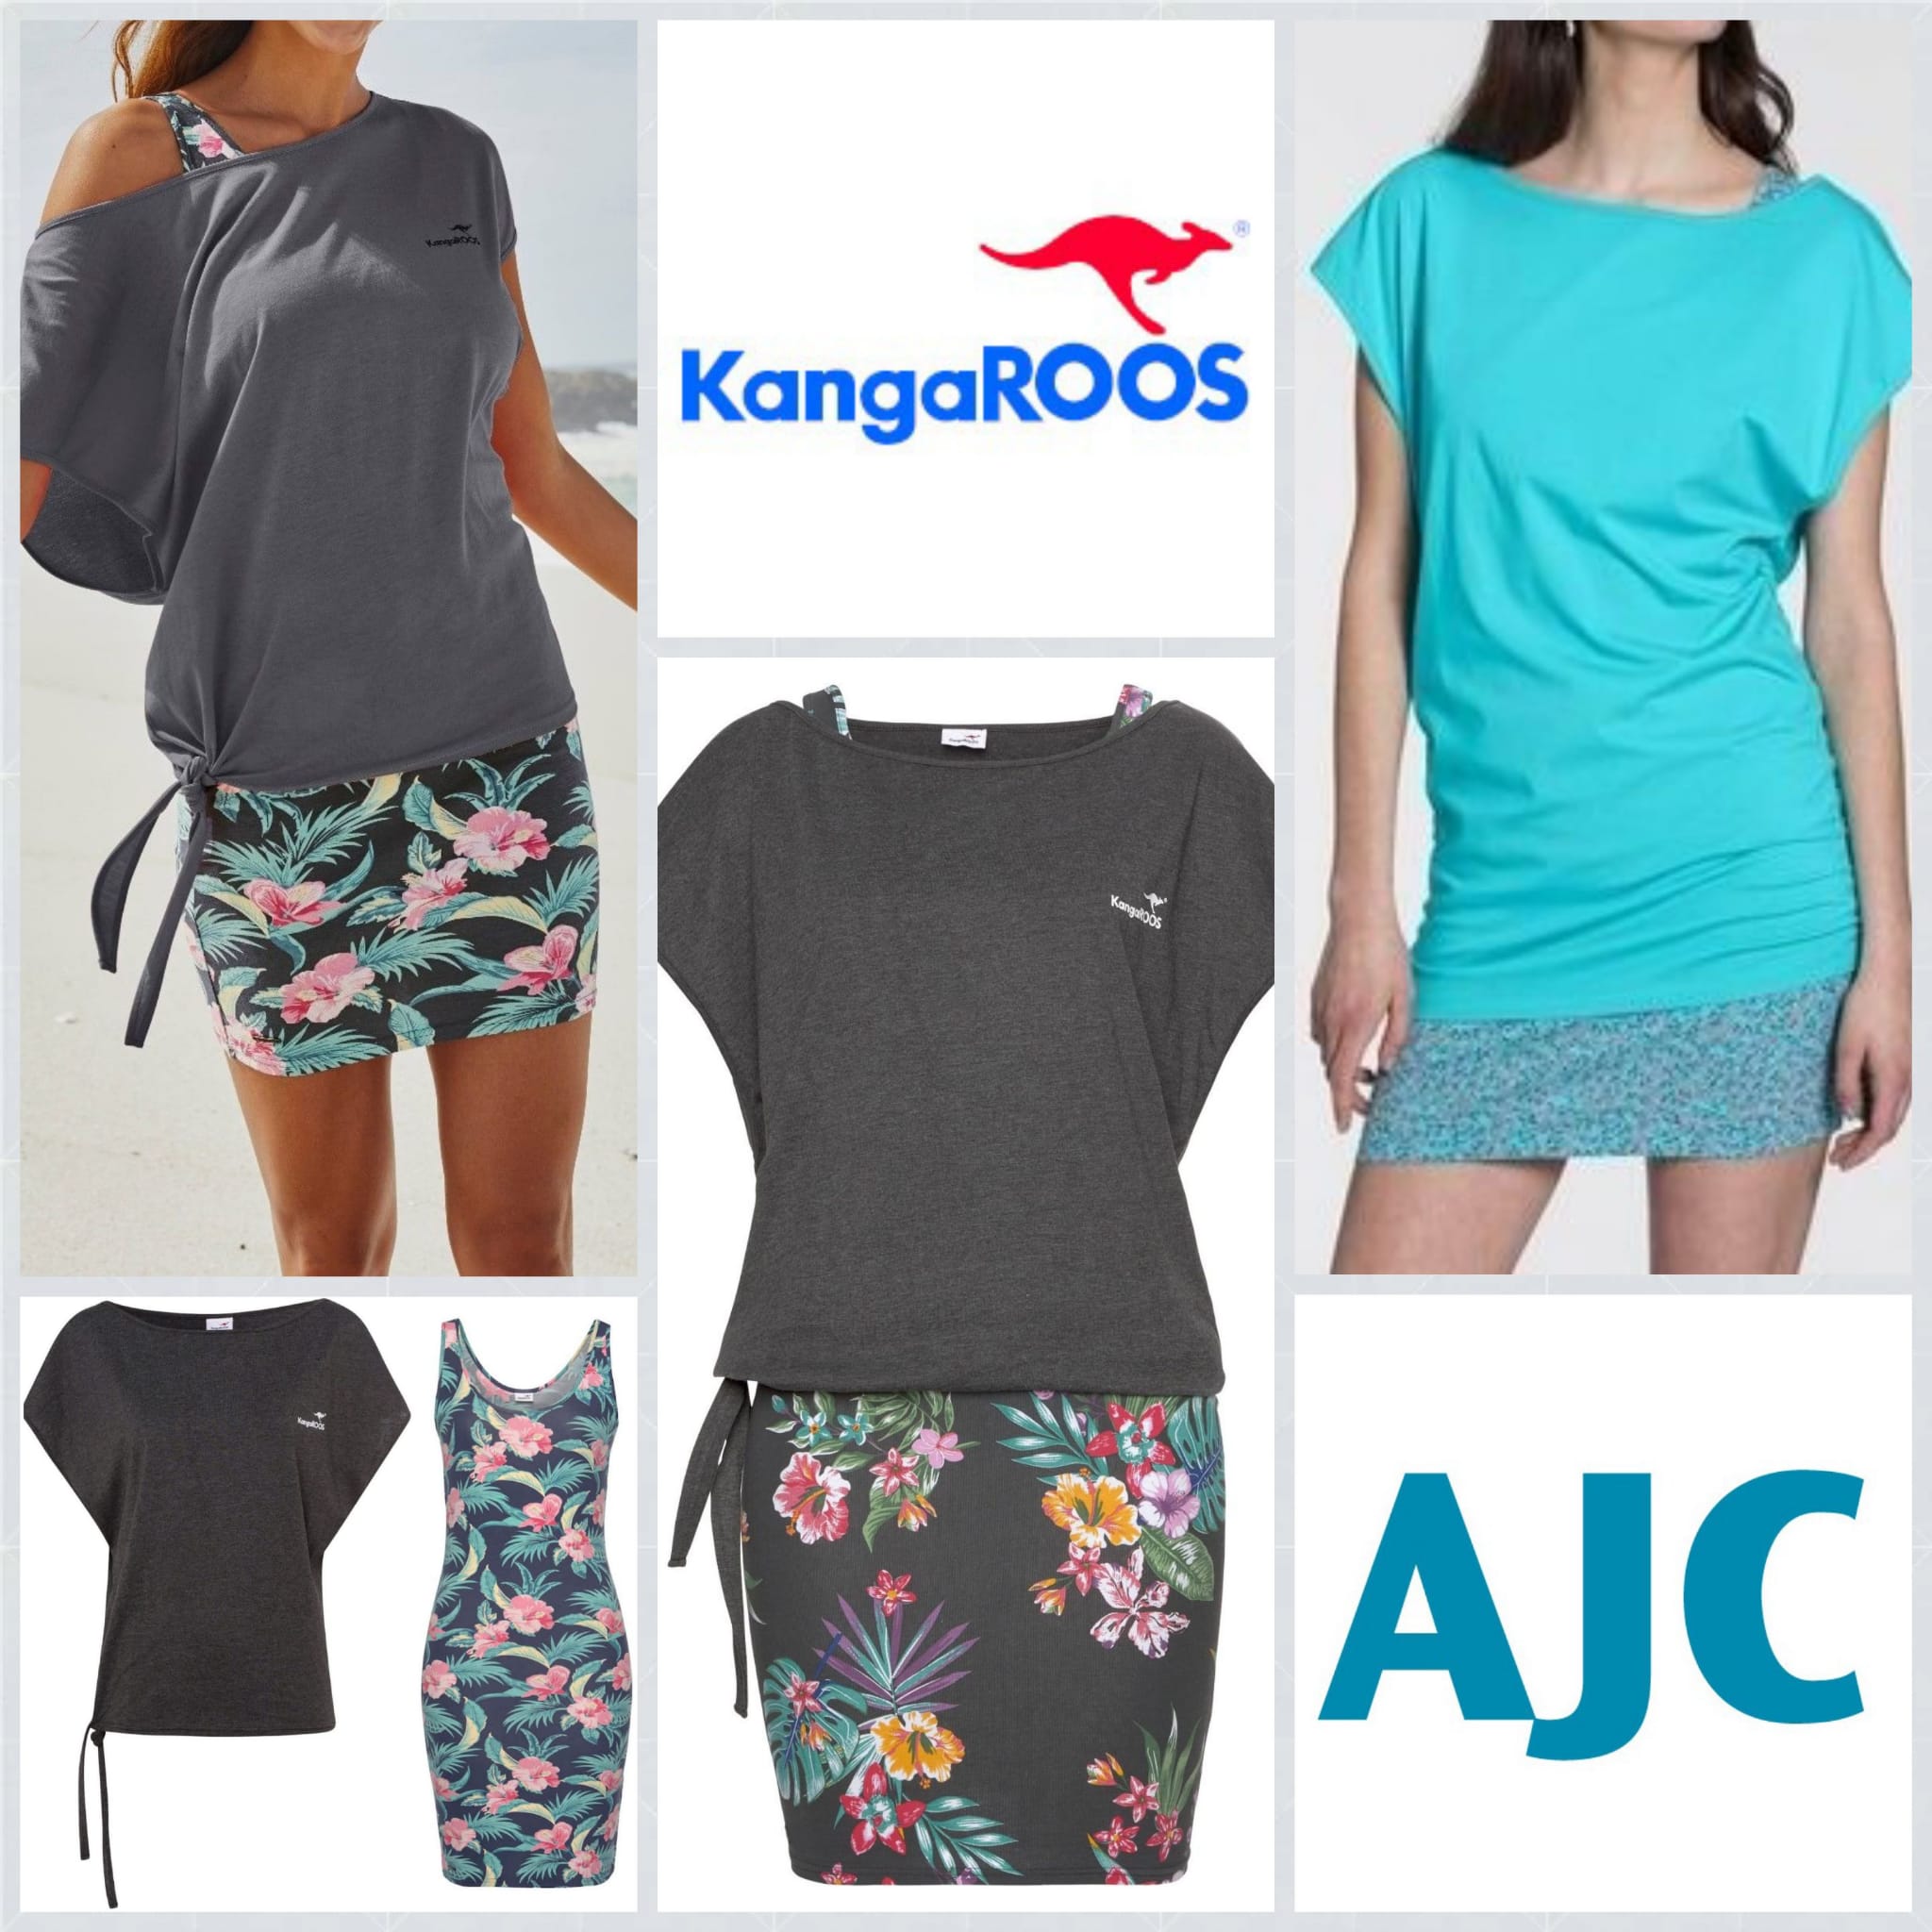 Women's sets from KangaROOS and AJC